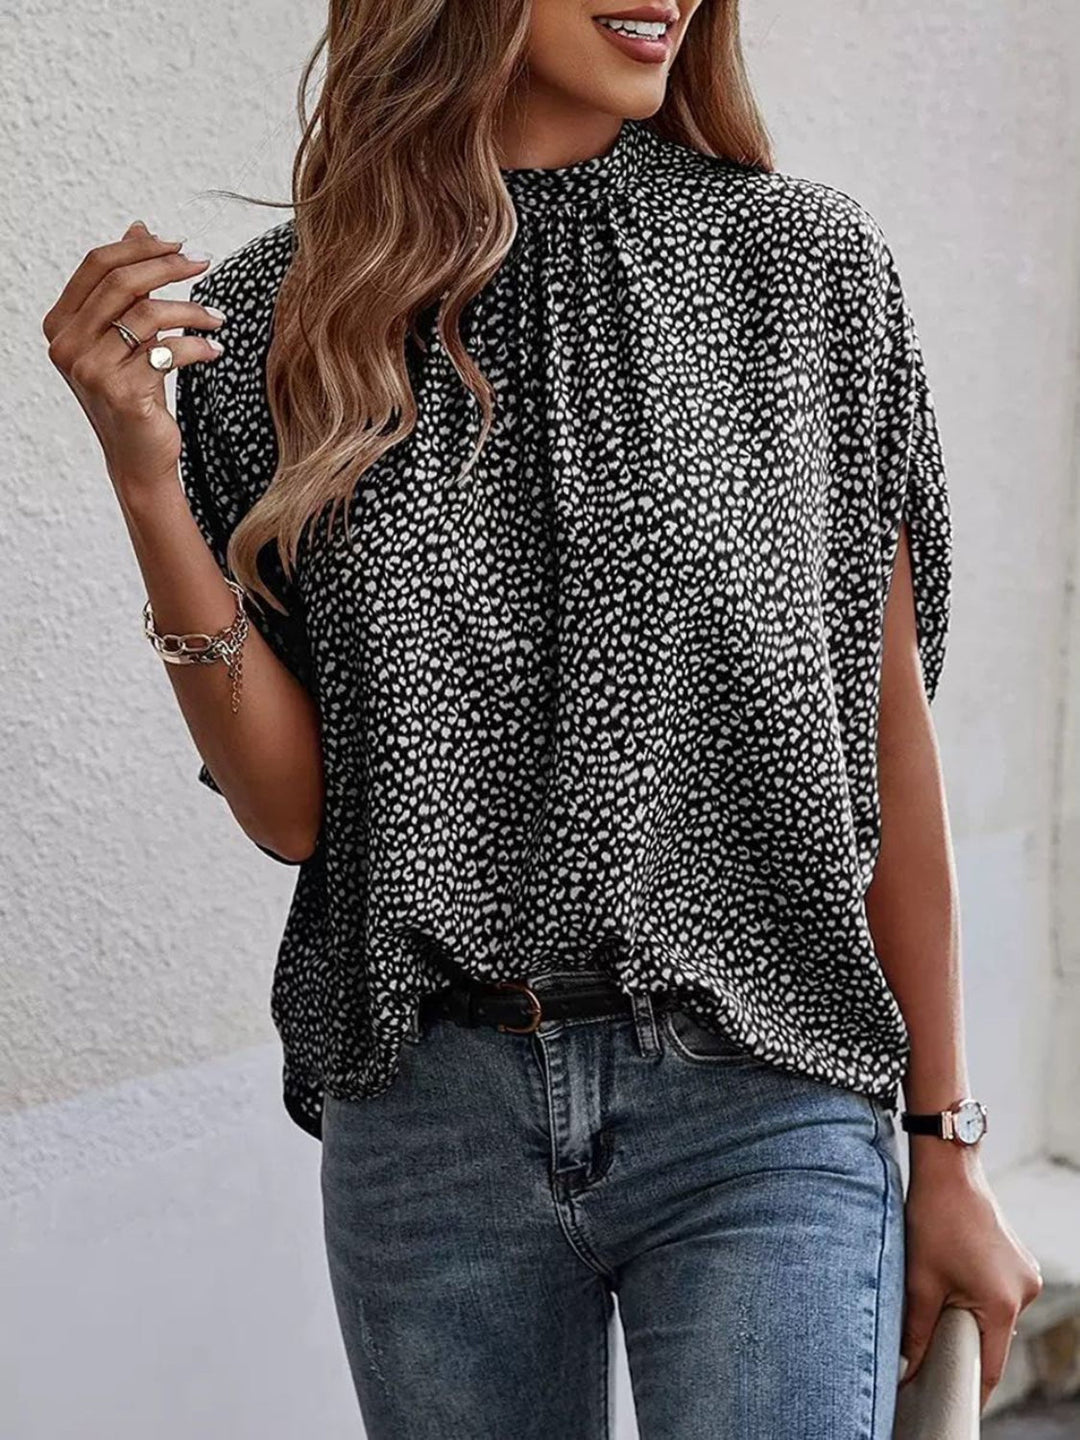 Tied Printed Mock Neck Half Sleeve Blouse by Coco Charli